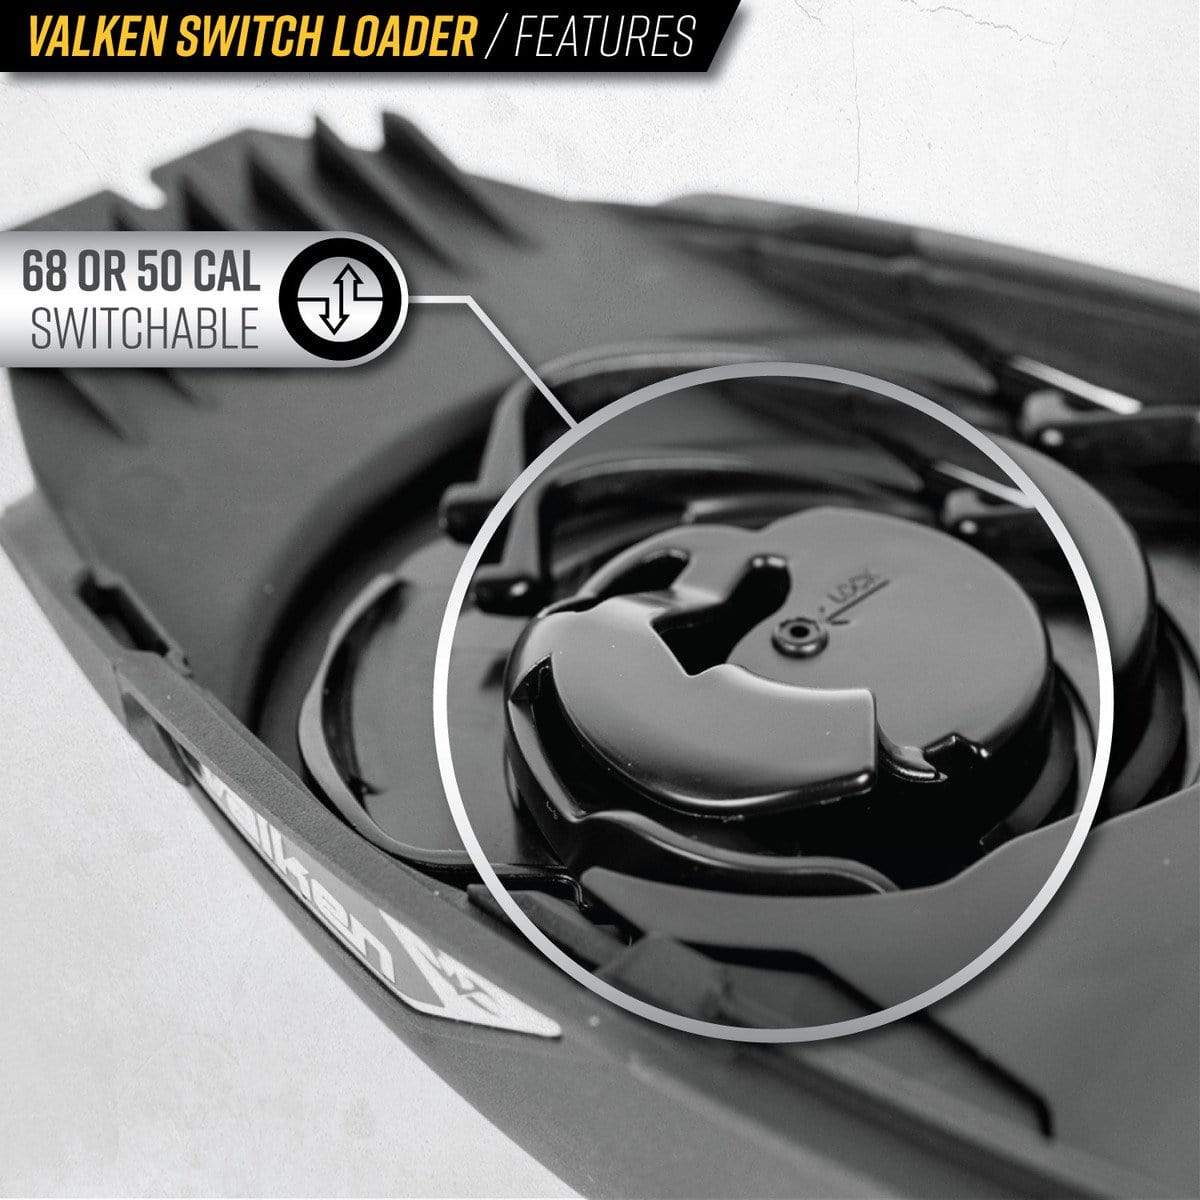 Valken VSL Electronic Loader - Eminent Paintball And Airsoft